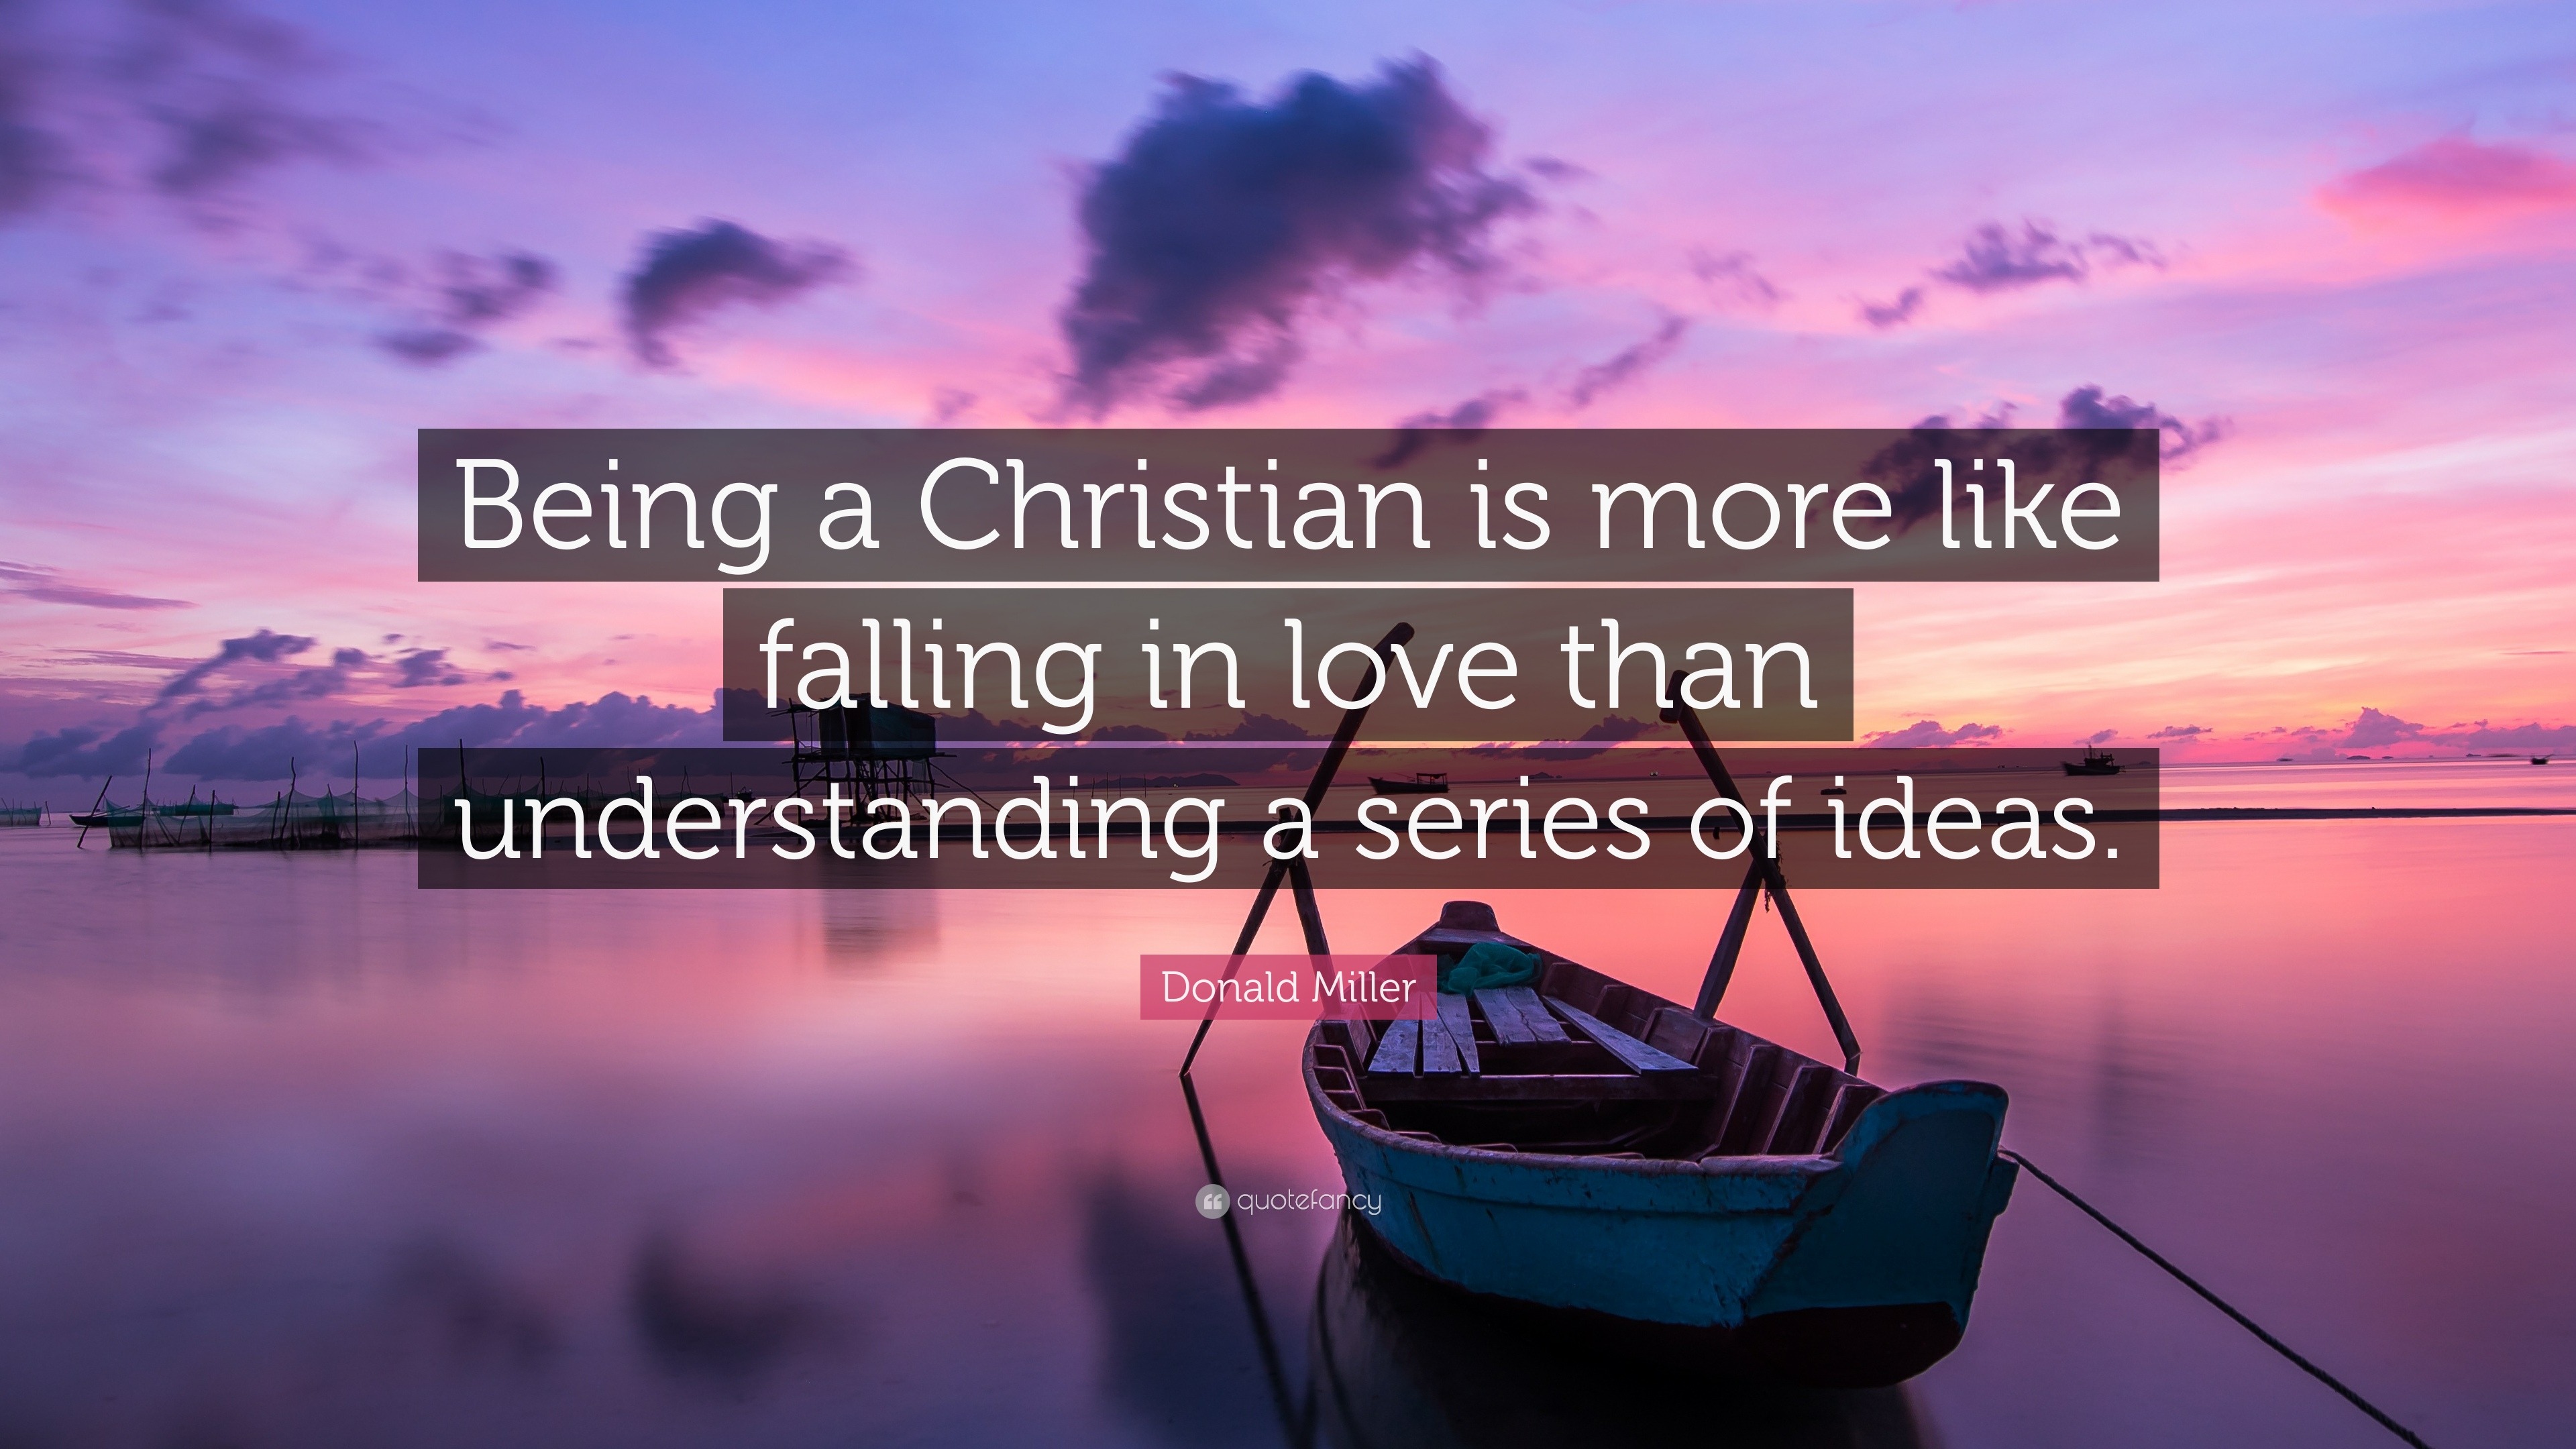 1852903 Donald Miller Quote Being a Christian is more like falling in love